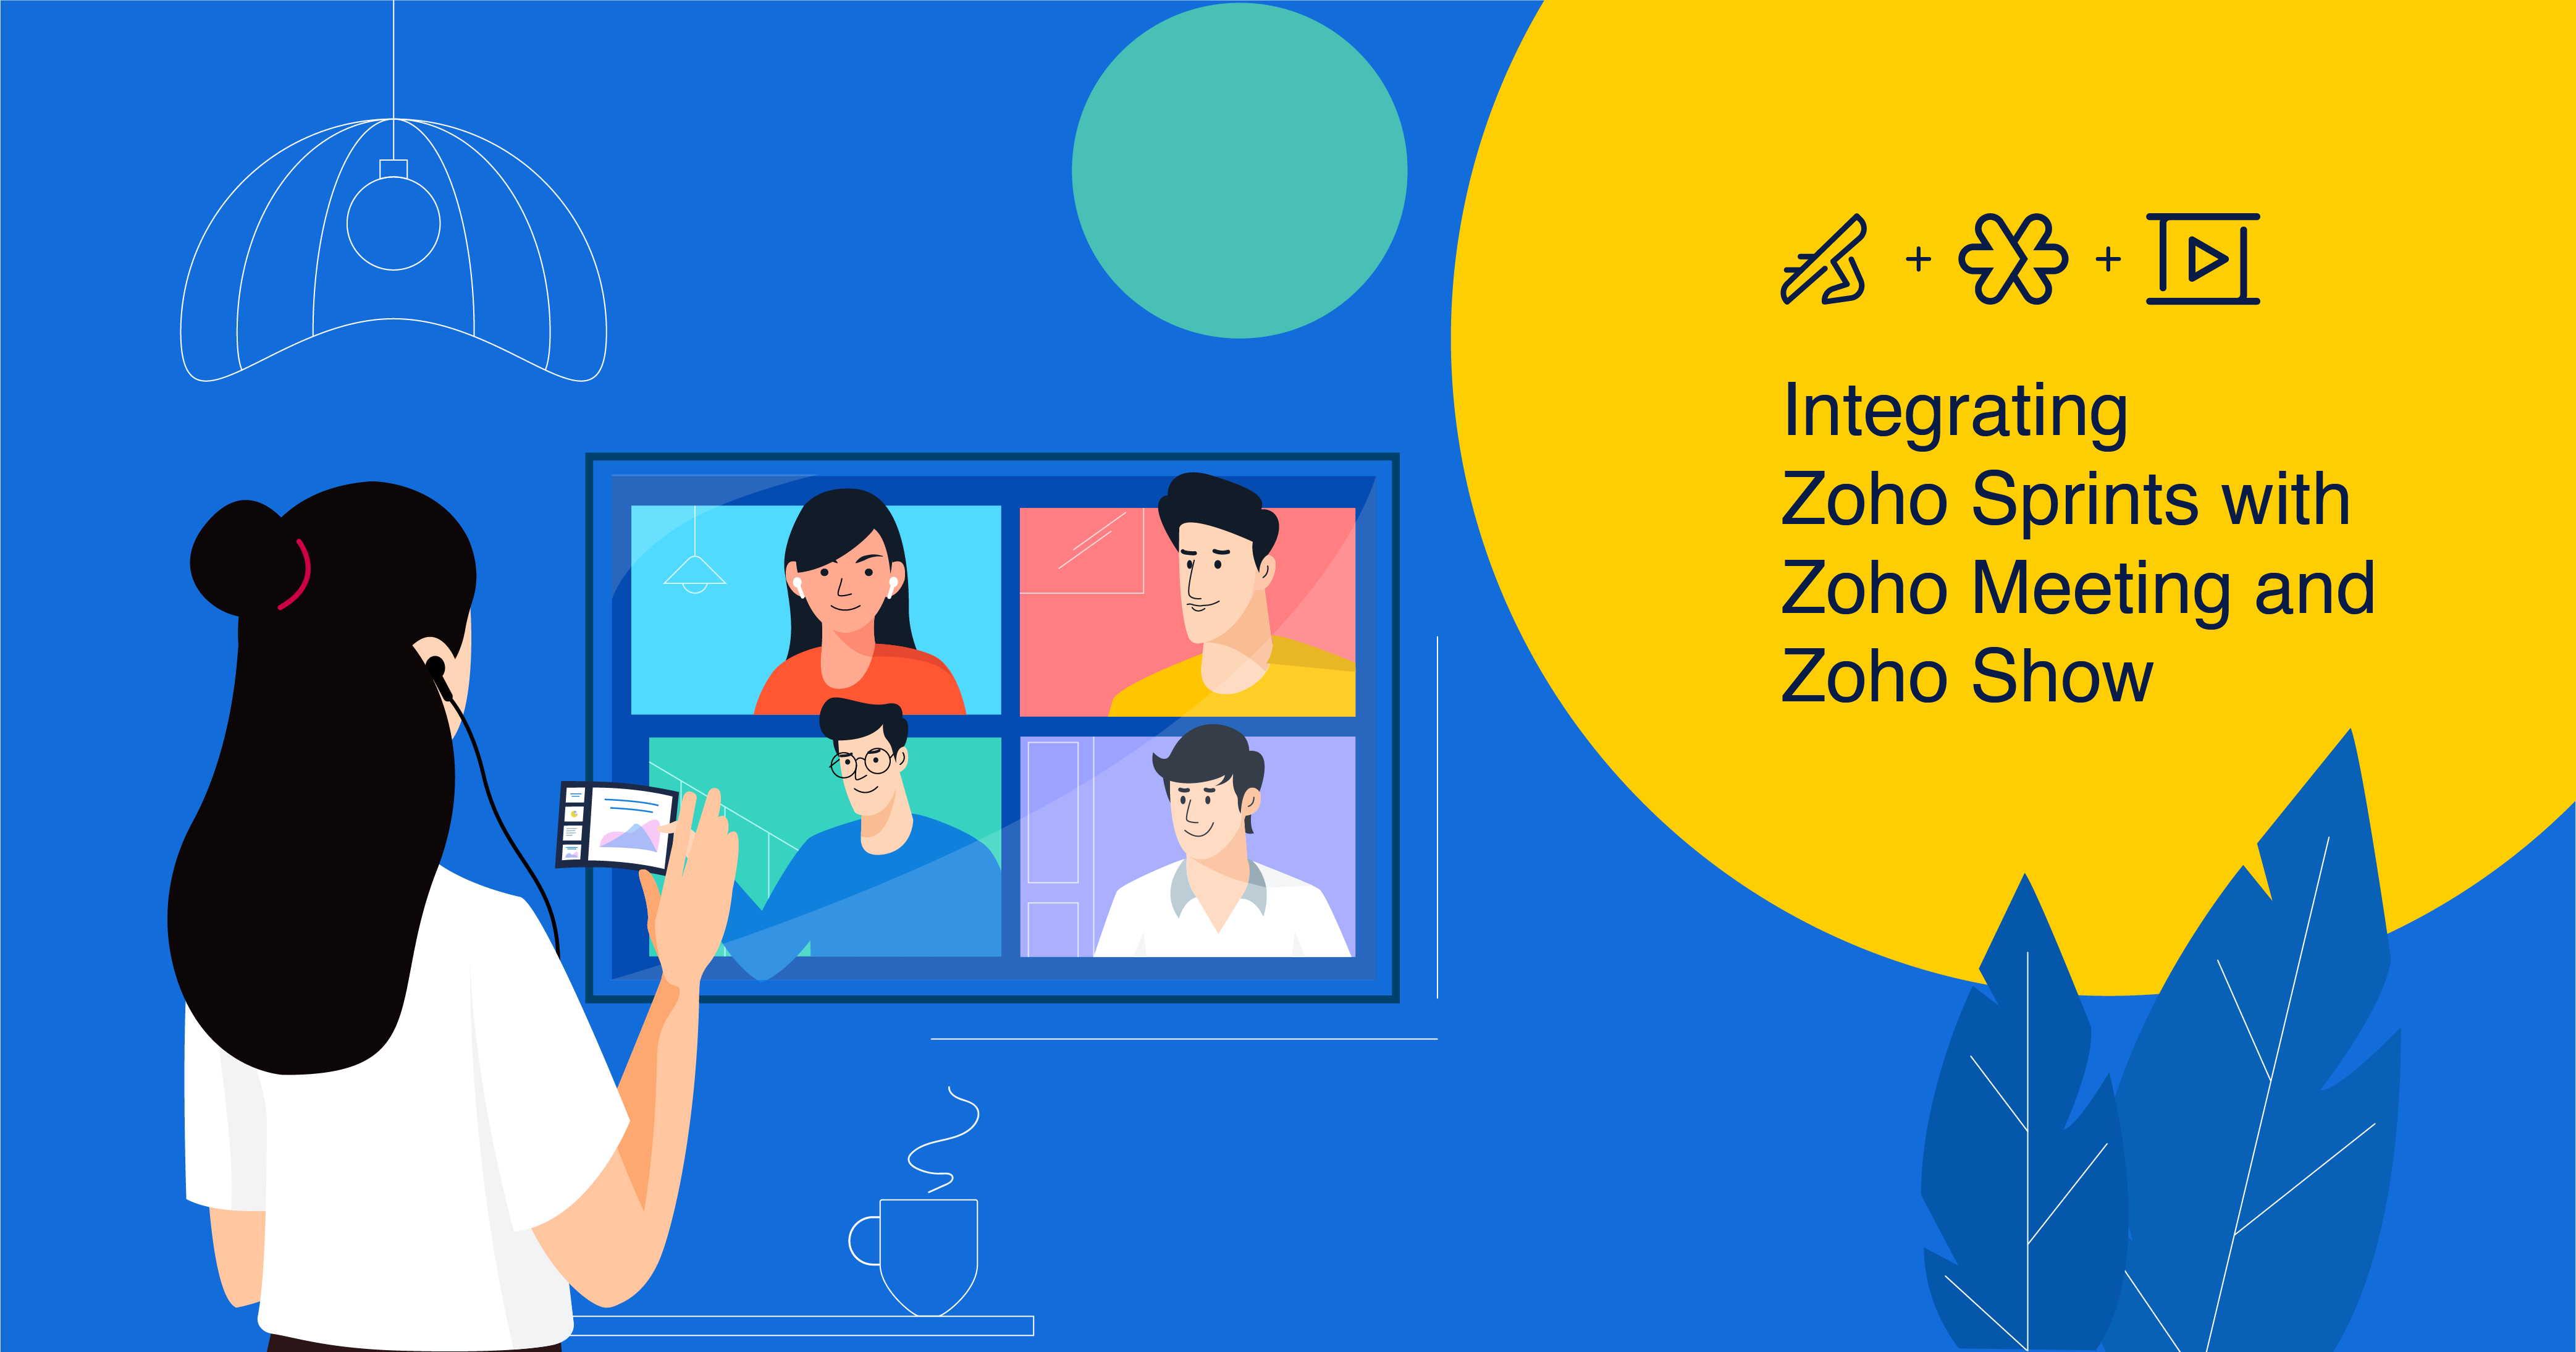 Work smarter by integrating Zoho Sprints with Zoho Meeting and Zoho Show